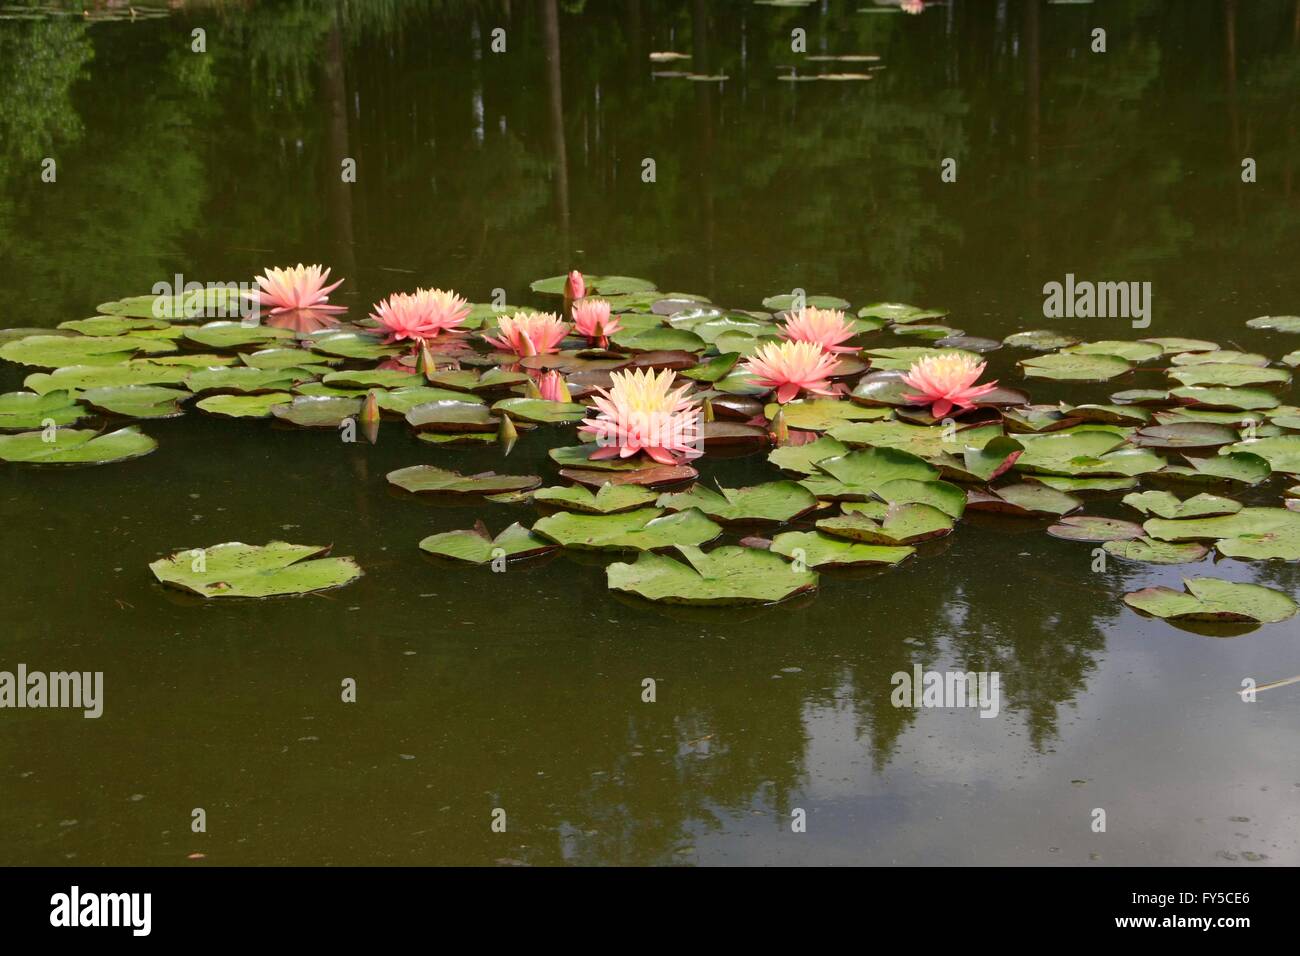 A Lily pond with different colored water lilies. The water lily (Nymphaea) is a genus in the family Nymphaeaceae. Worldwide, this genus comprises about fifty species. Eckardts, Thuringia, Germany, Europe Date: July 28, 2014 Stock Photo